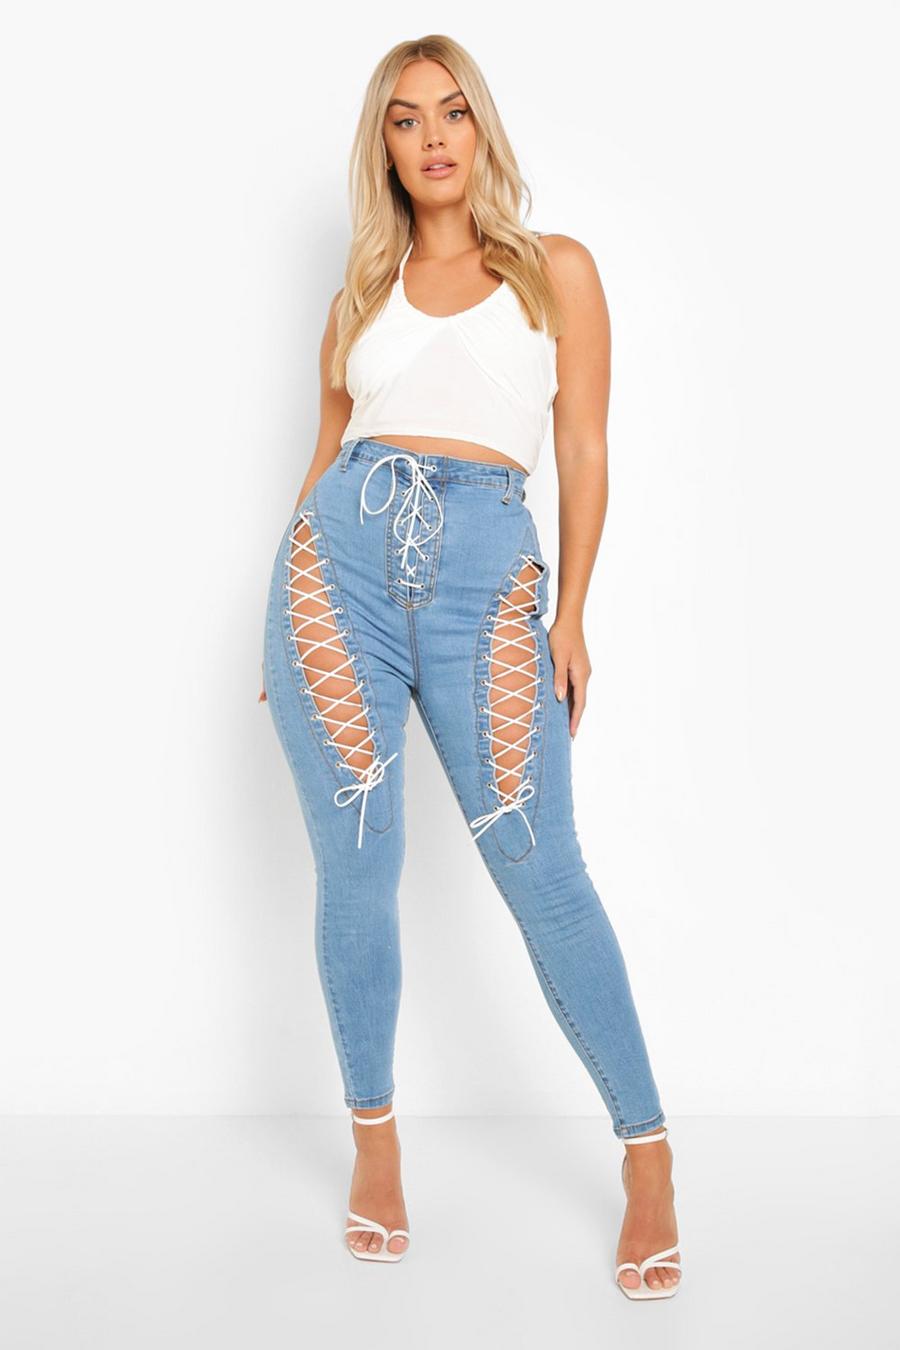 LACED UP JEAN PANTS I CORSET STYLE JEANS